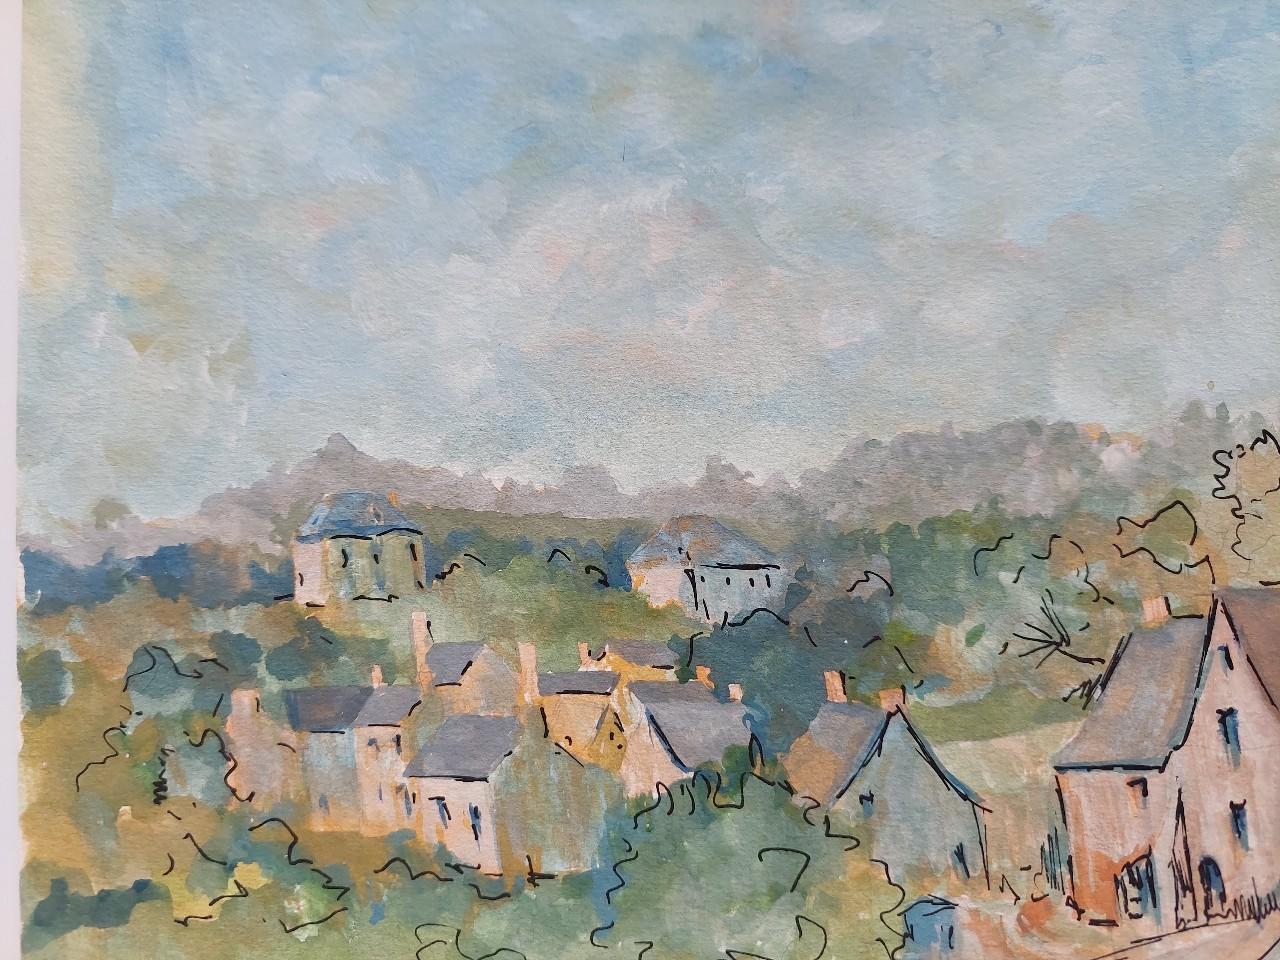 Other 20th Century French Modernist Cubist Painting Labbe, a French Village